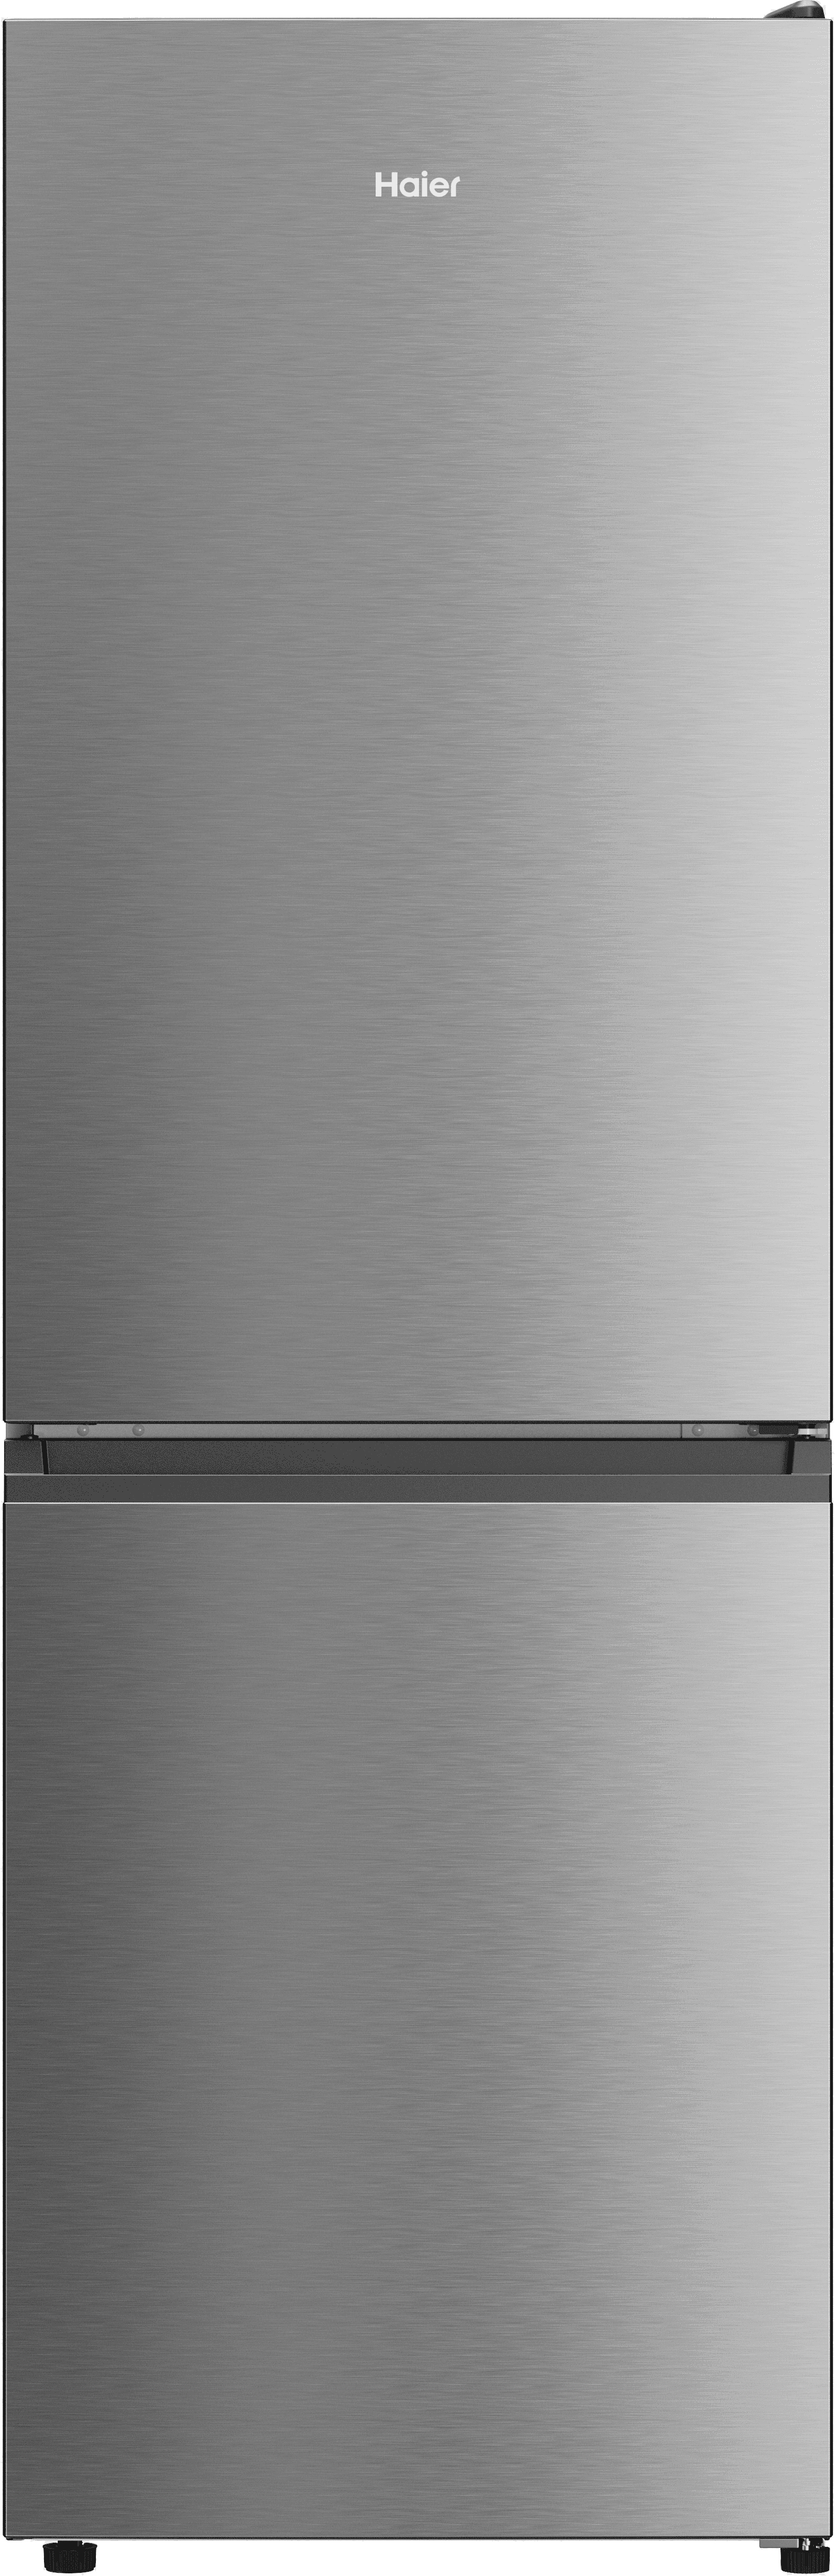 Haier HDW1618DNPK(UK) Wifi Connected 60/40 No Frost Fridge Freezer - Inox - D Rated, Stainless Steel